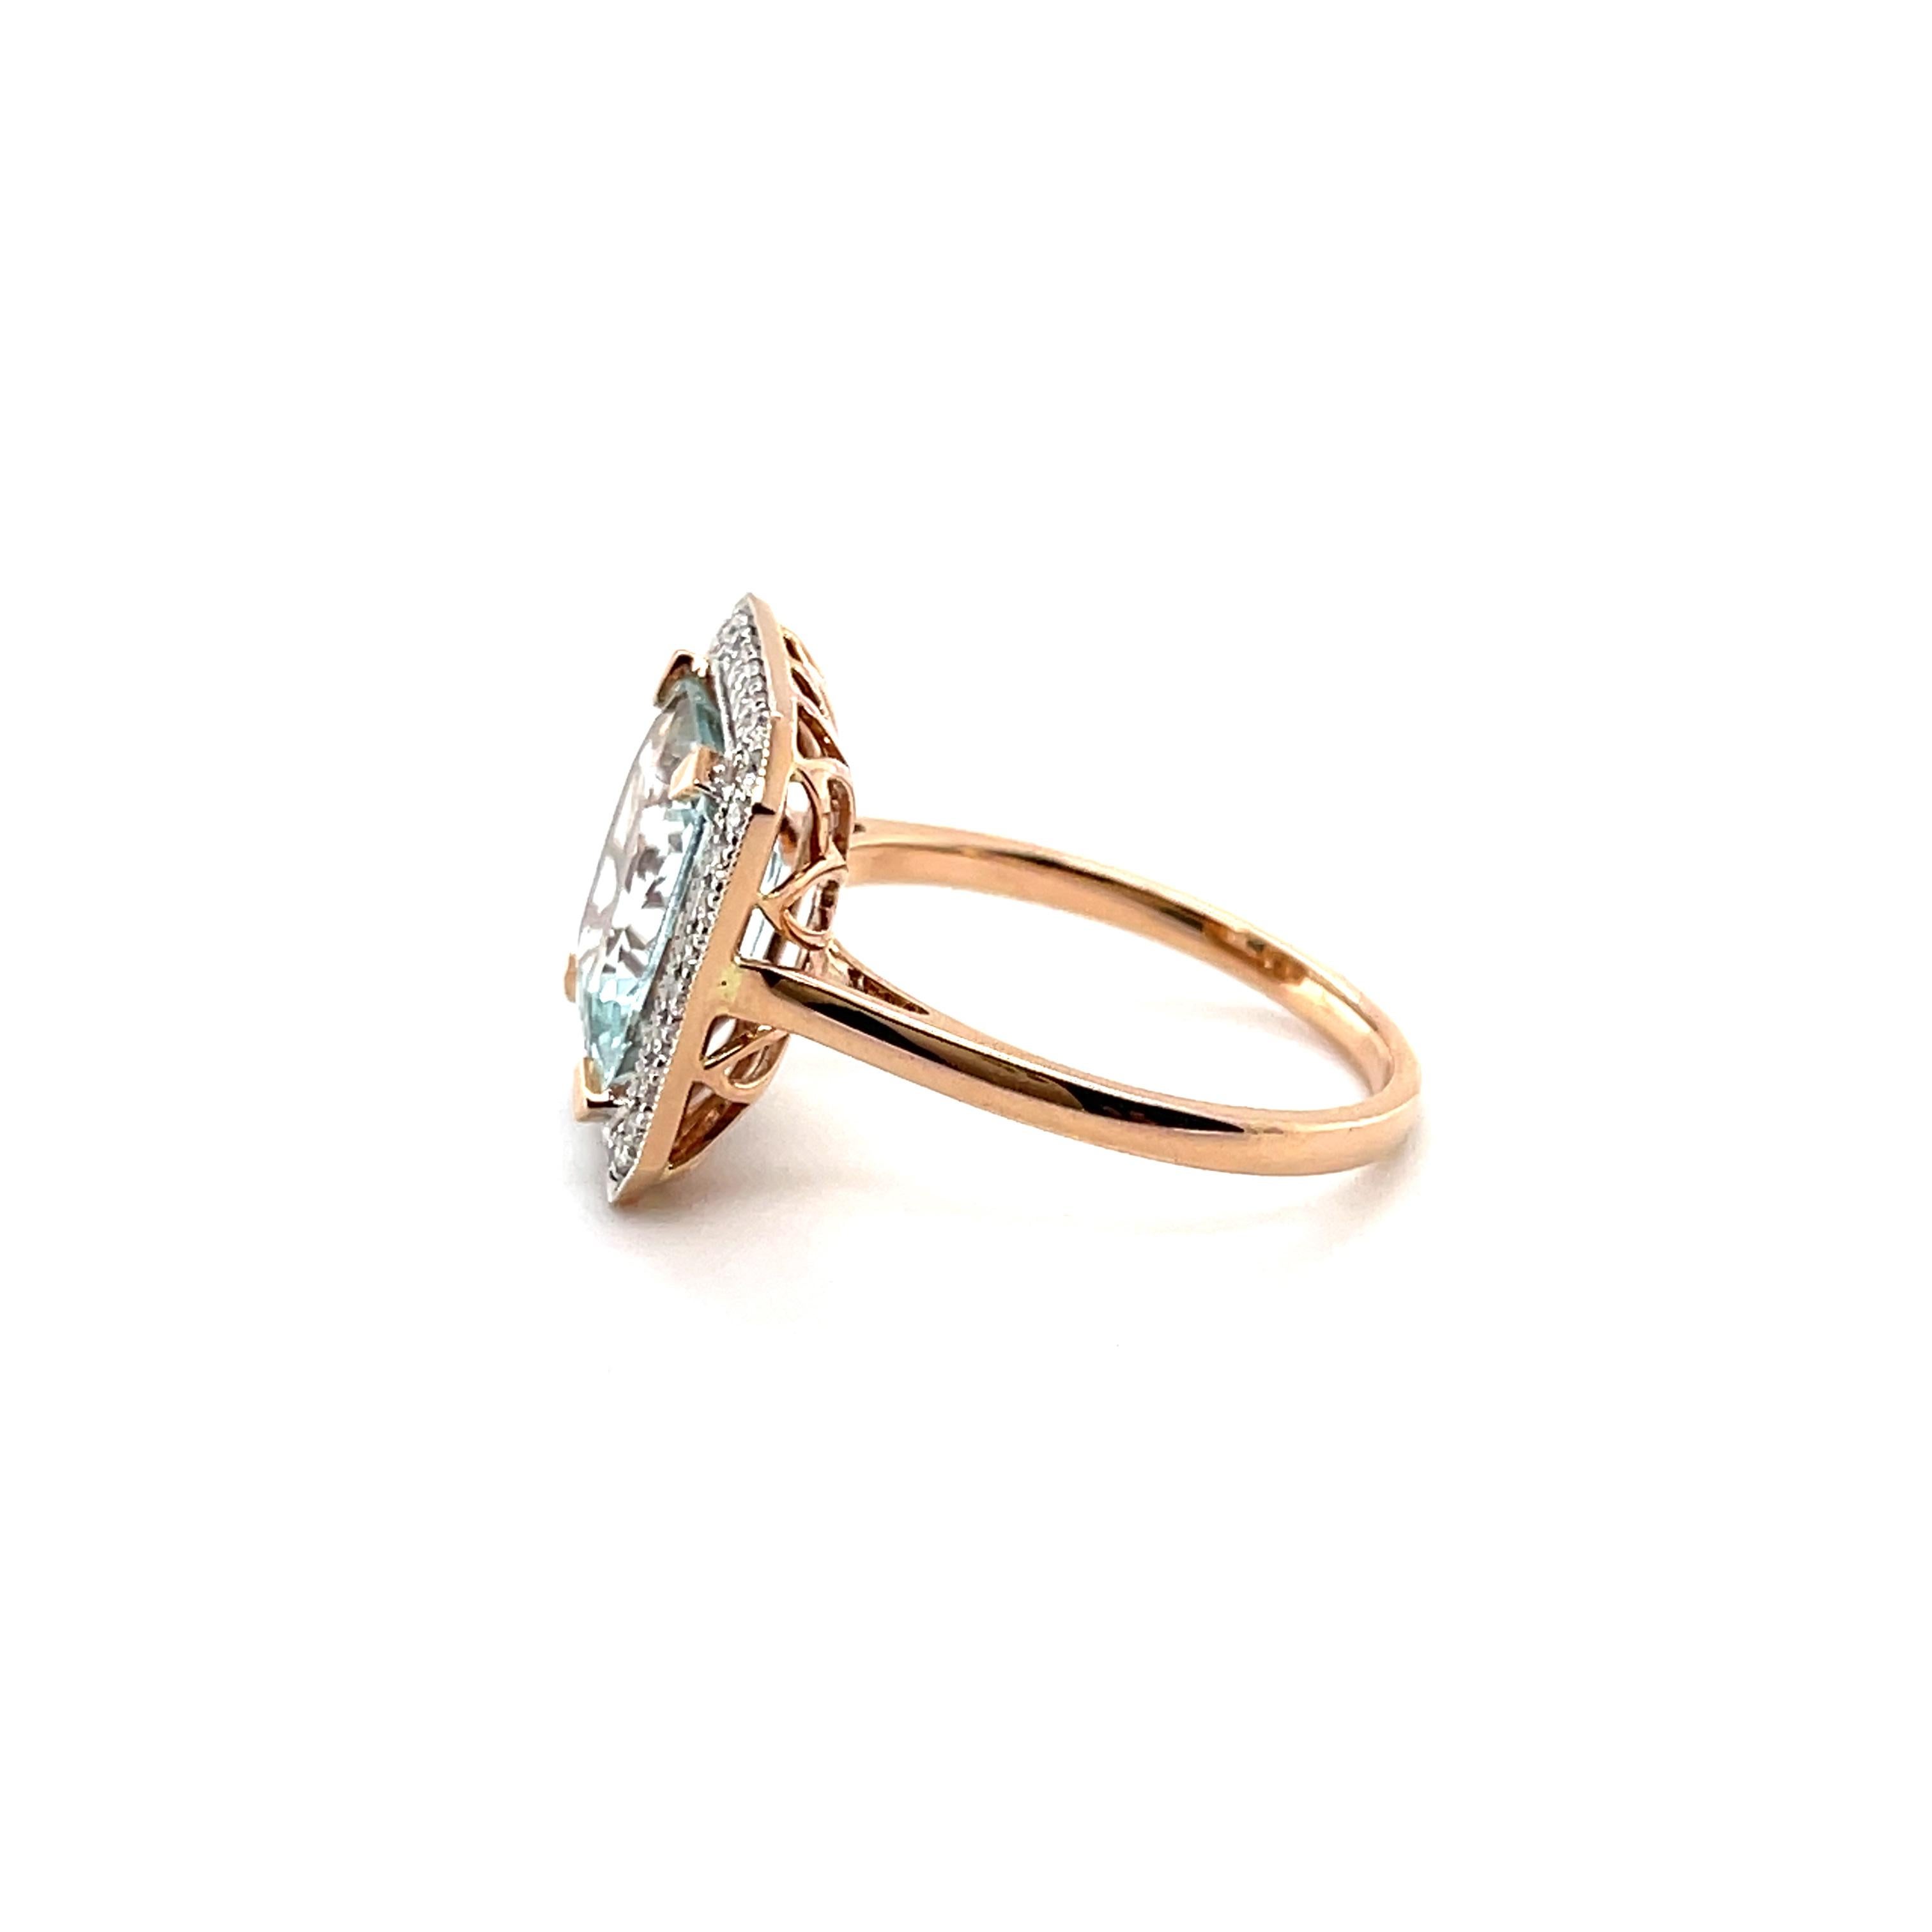 For Sale:  14ct Rose Gold Ring with 3.44ct Aquamarine and Diamond 3